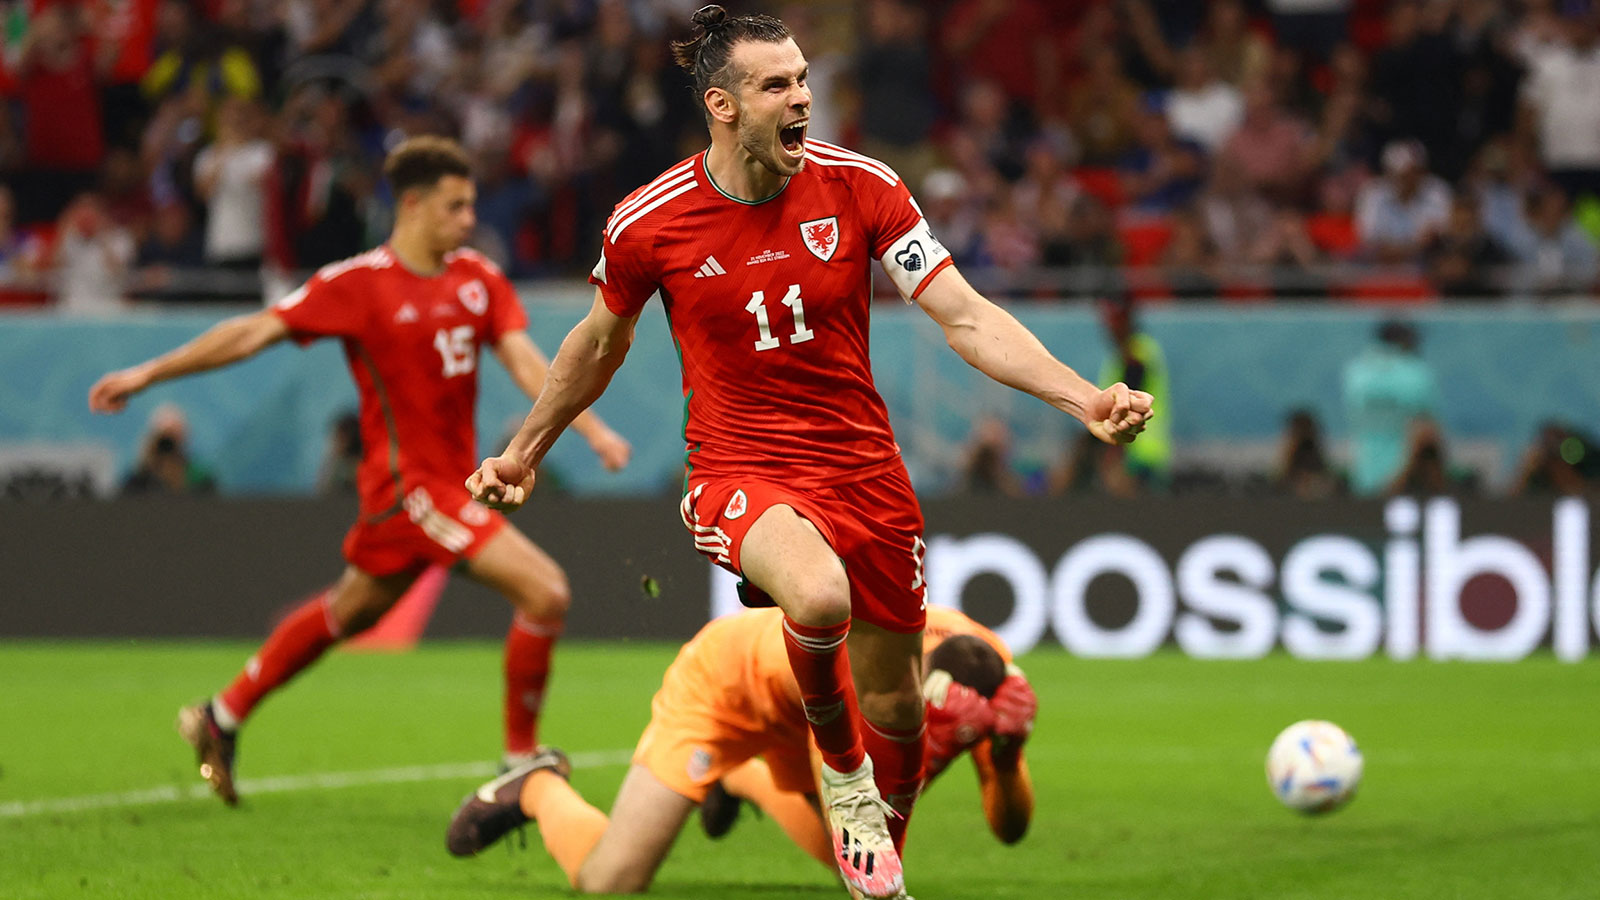 Wales' Gareth Bale celebrates after scoring a goal during a match against USA on November 21.